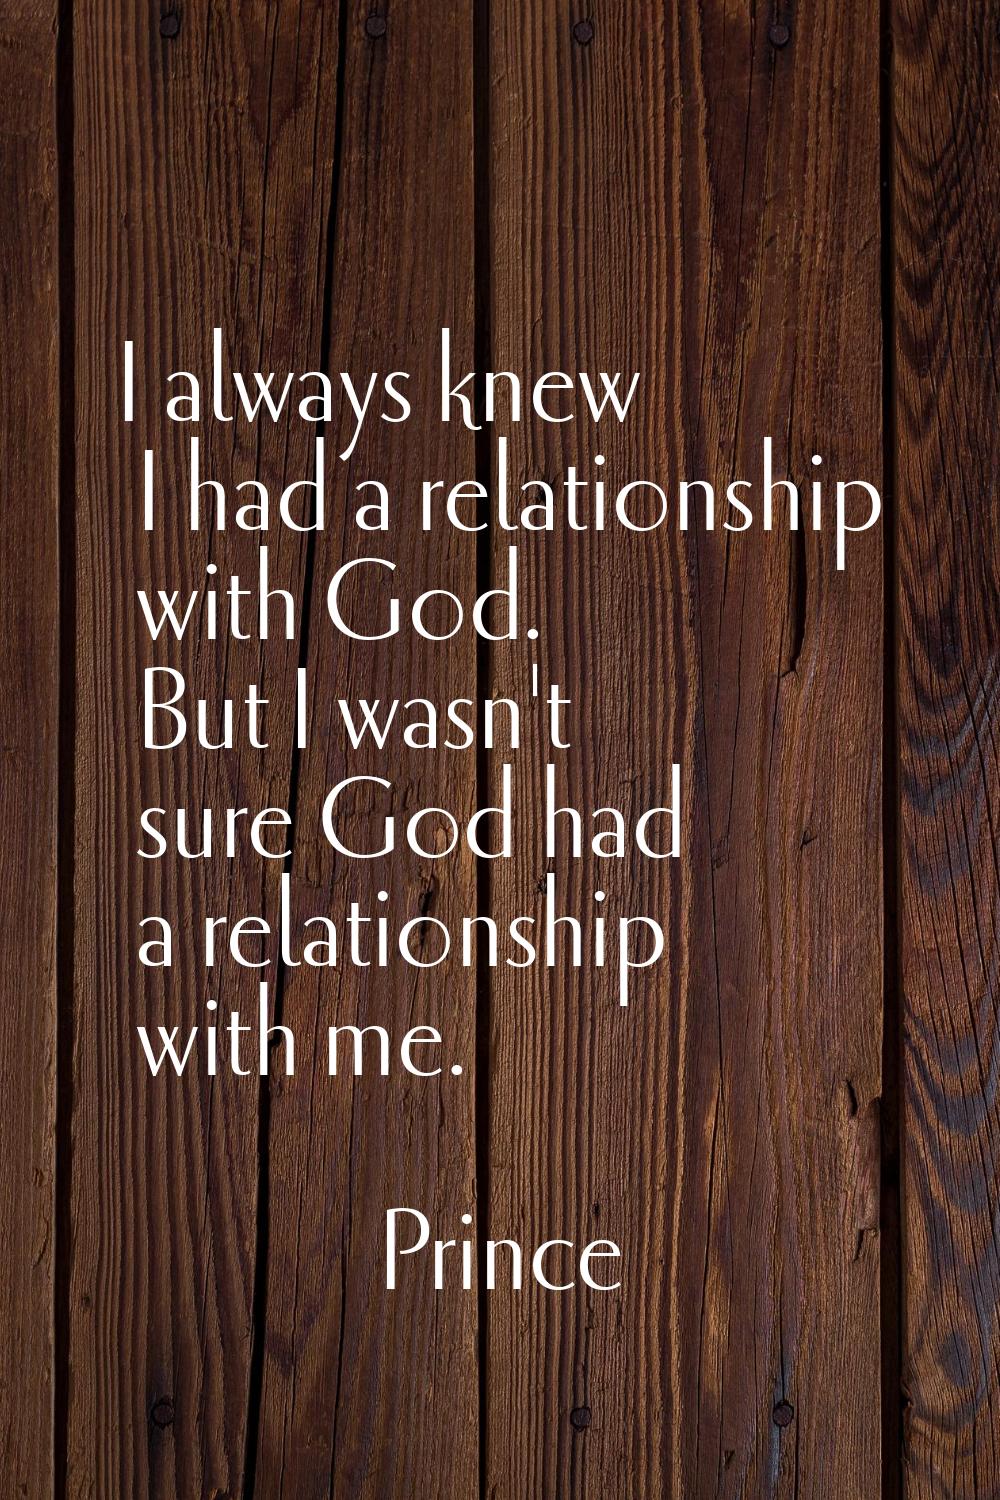 I always knew I had a relationship with God. But I wasn't sure God had a relationship with me.